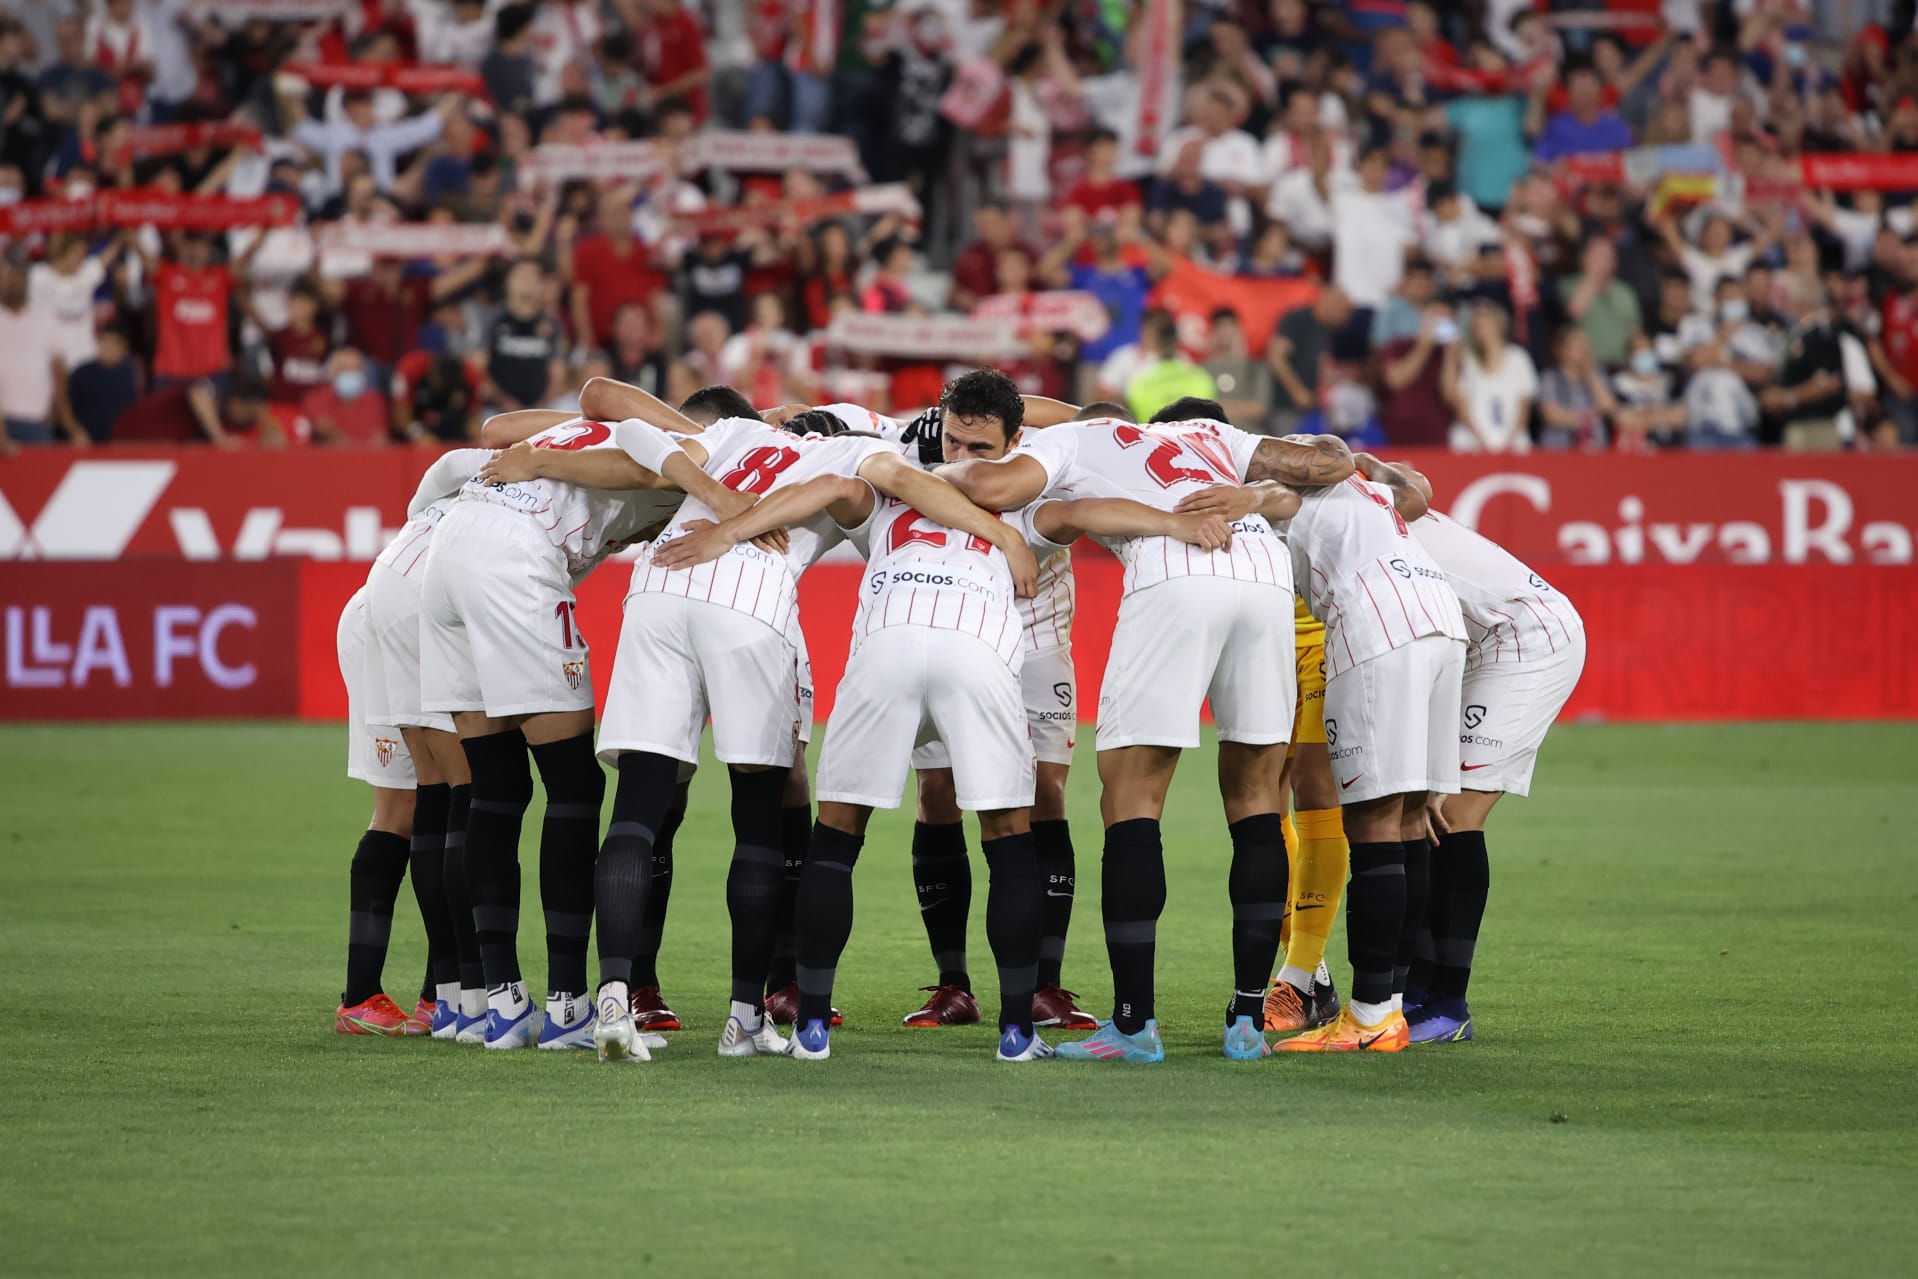 The Sevilla FC in a huddle before facing Athletic Club